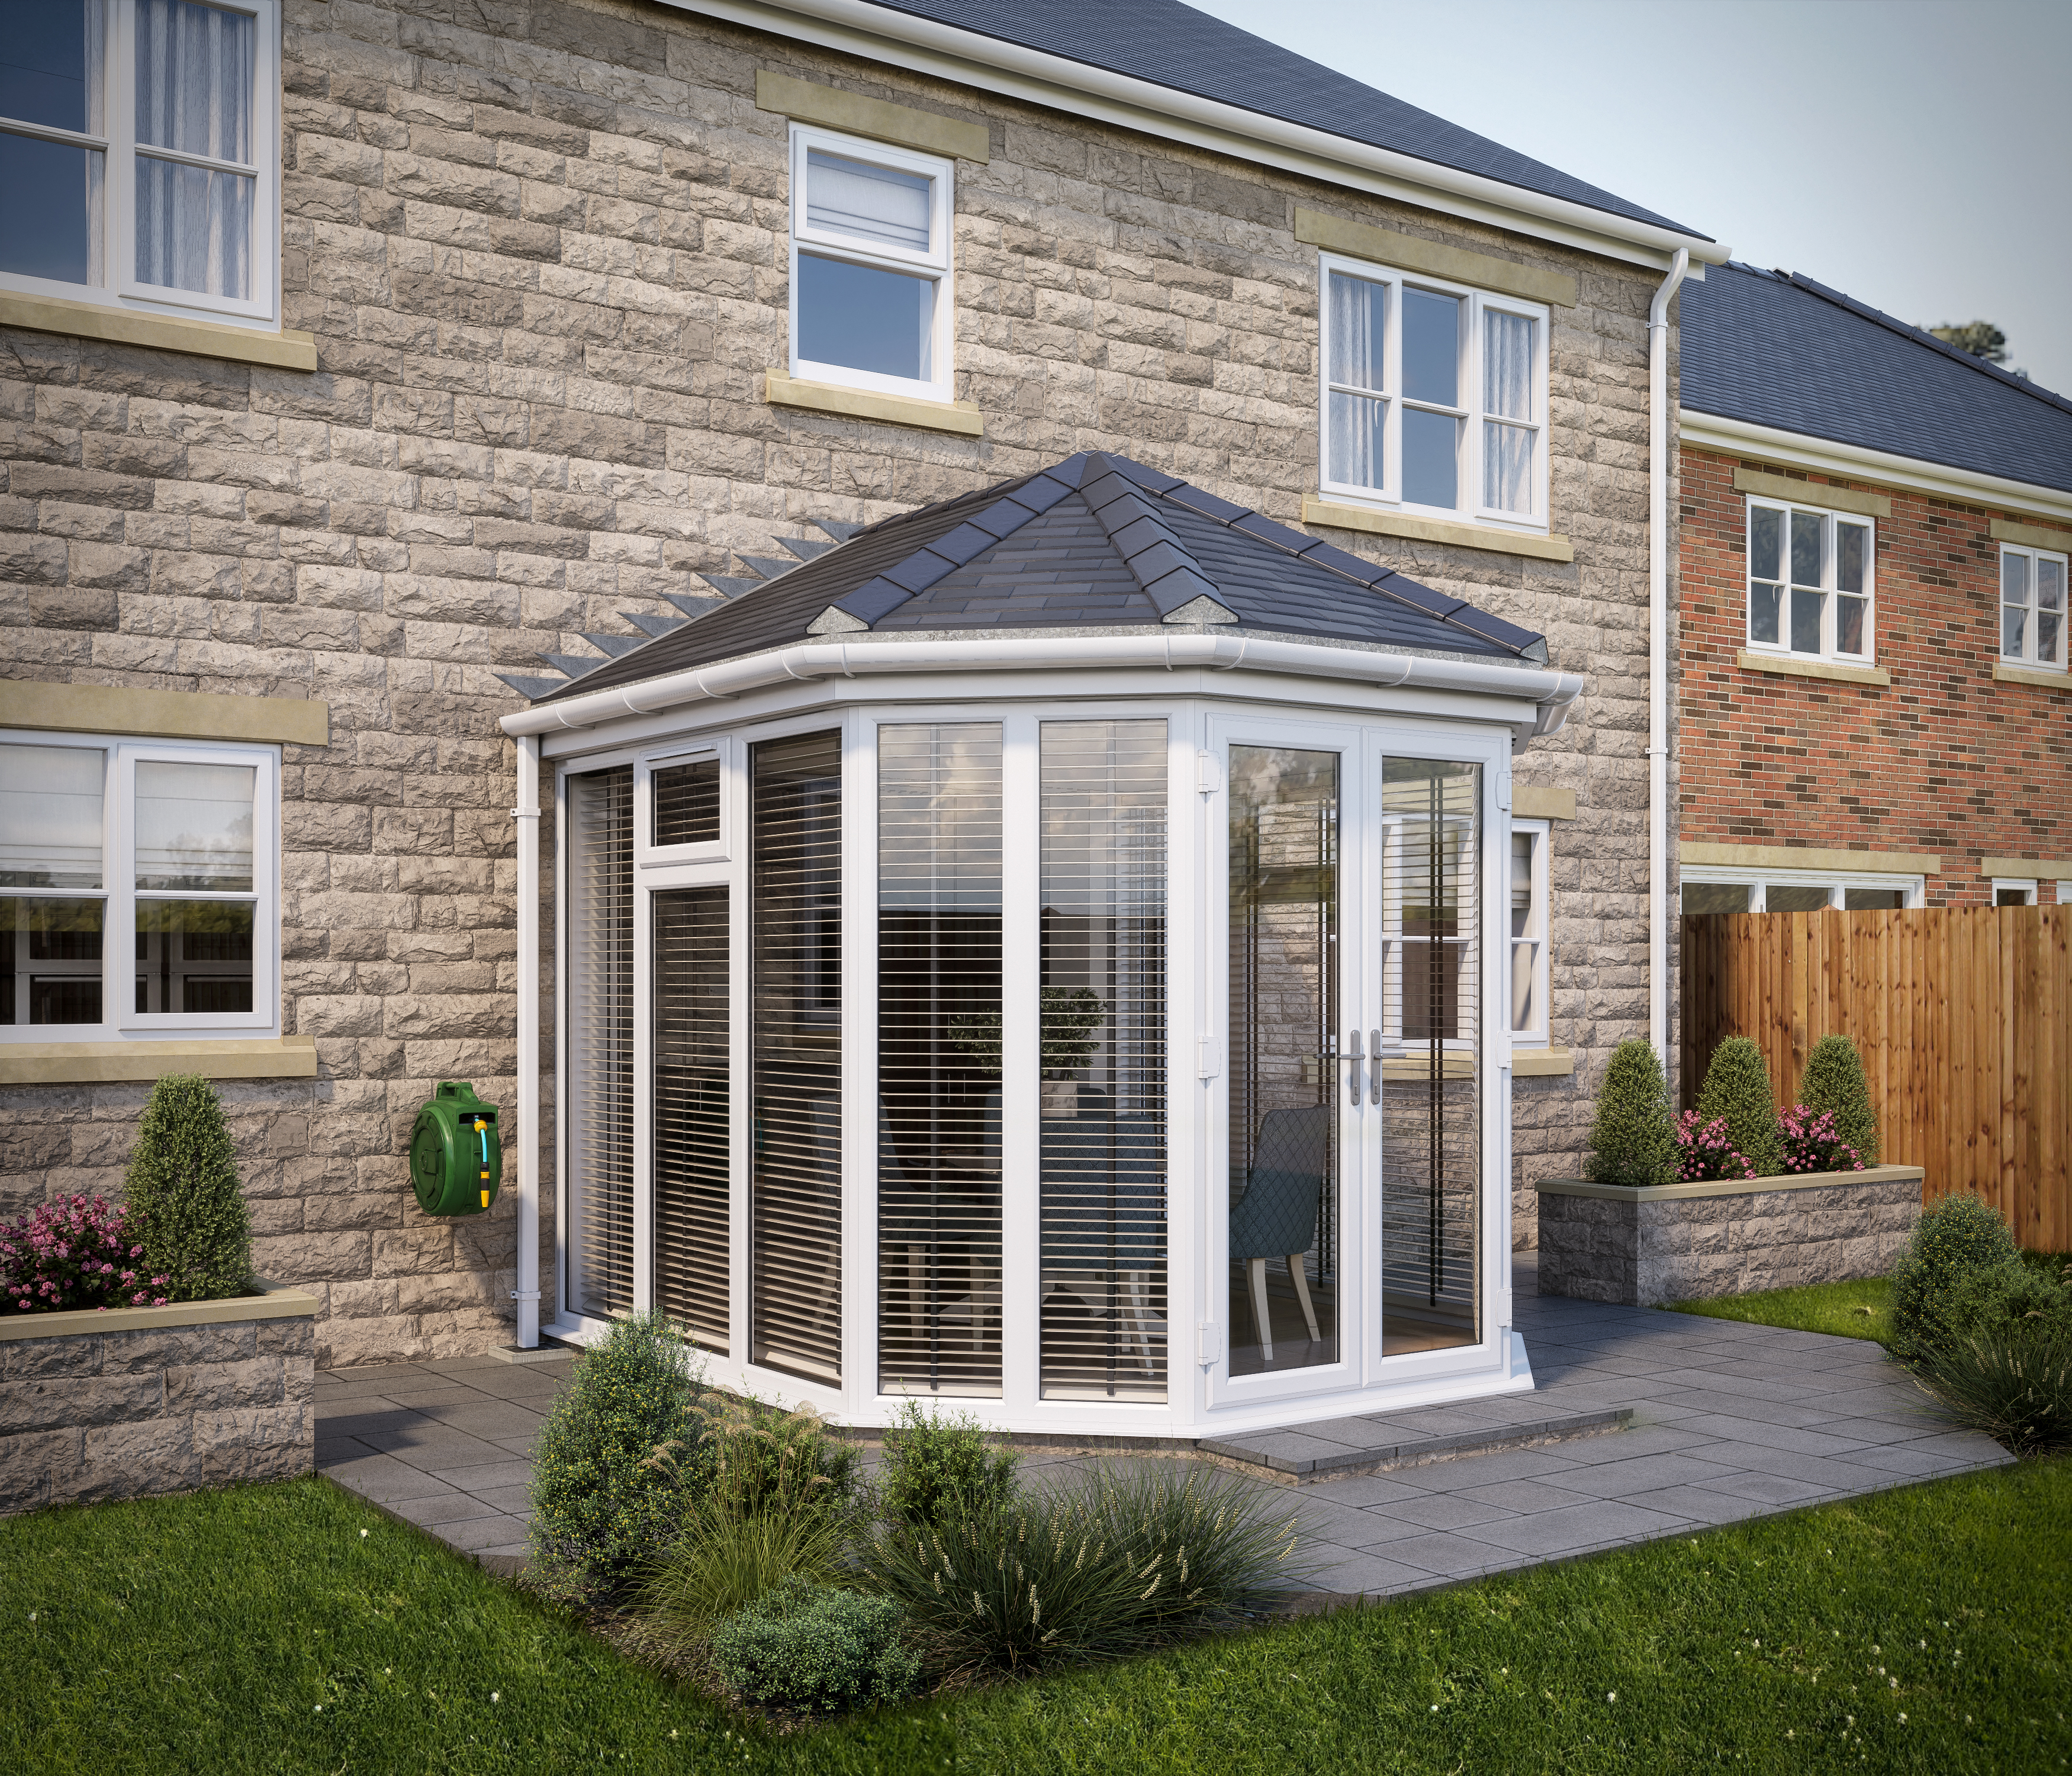 Image of SOLid Roof Full Height Victorian Conservatory White Frames with Titanium Grey Tiles - 13 x 13ft